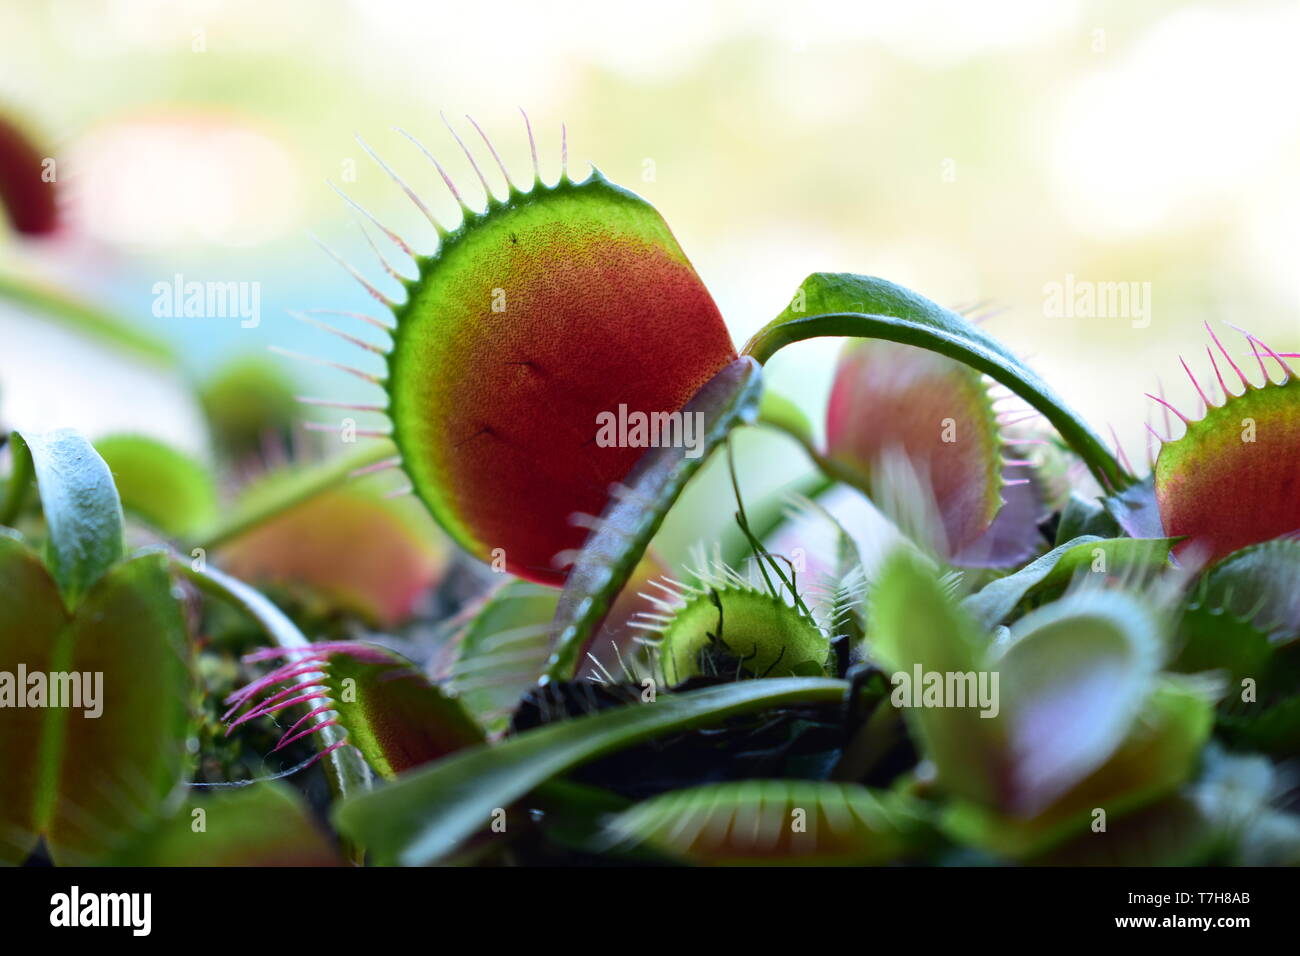 Details of a Venus Fly Trap plant Stock Photo